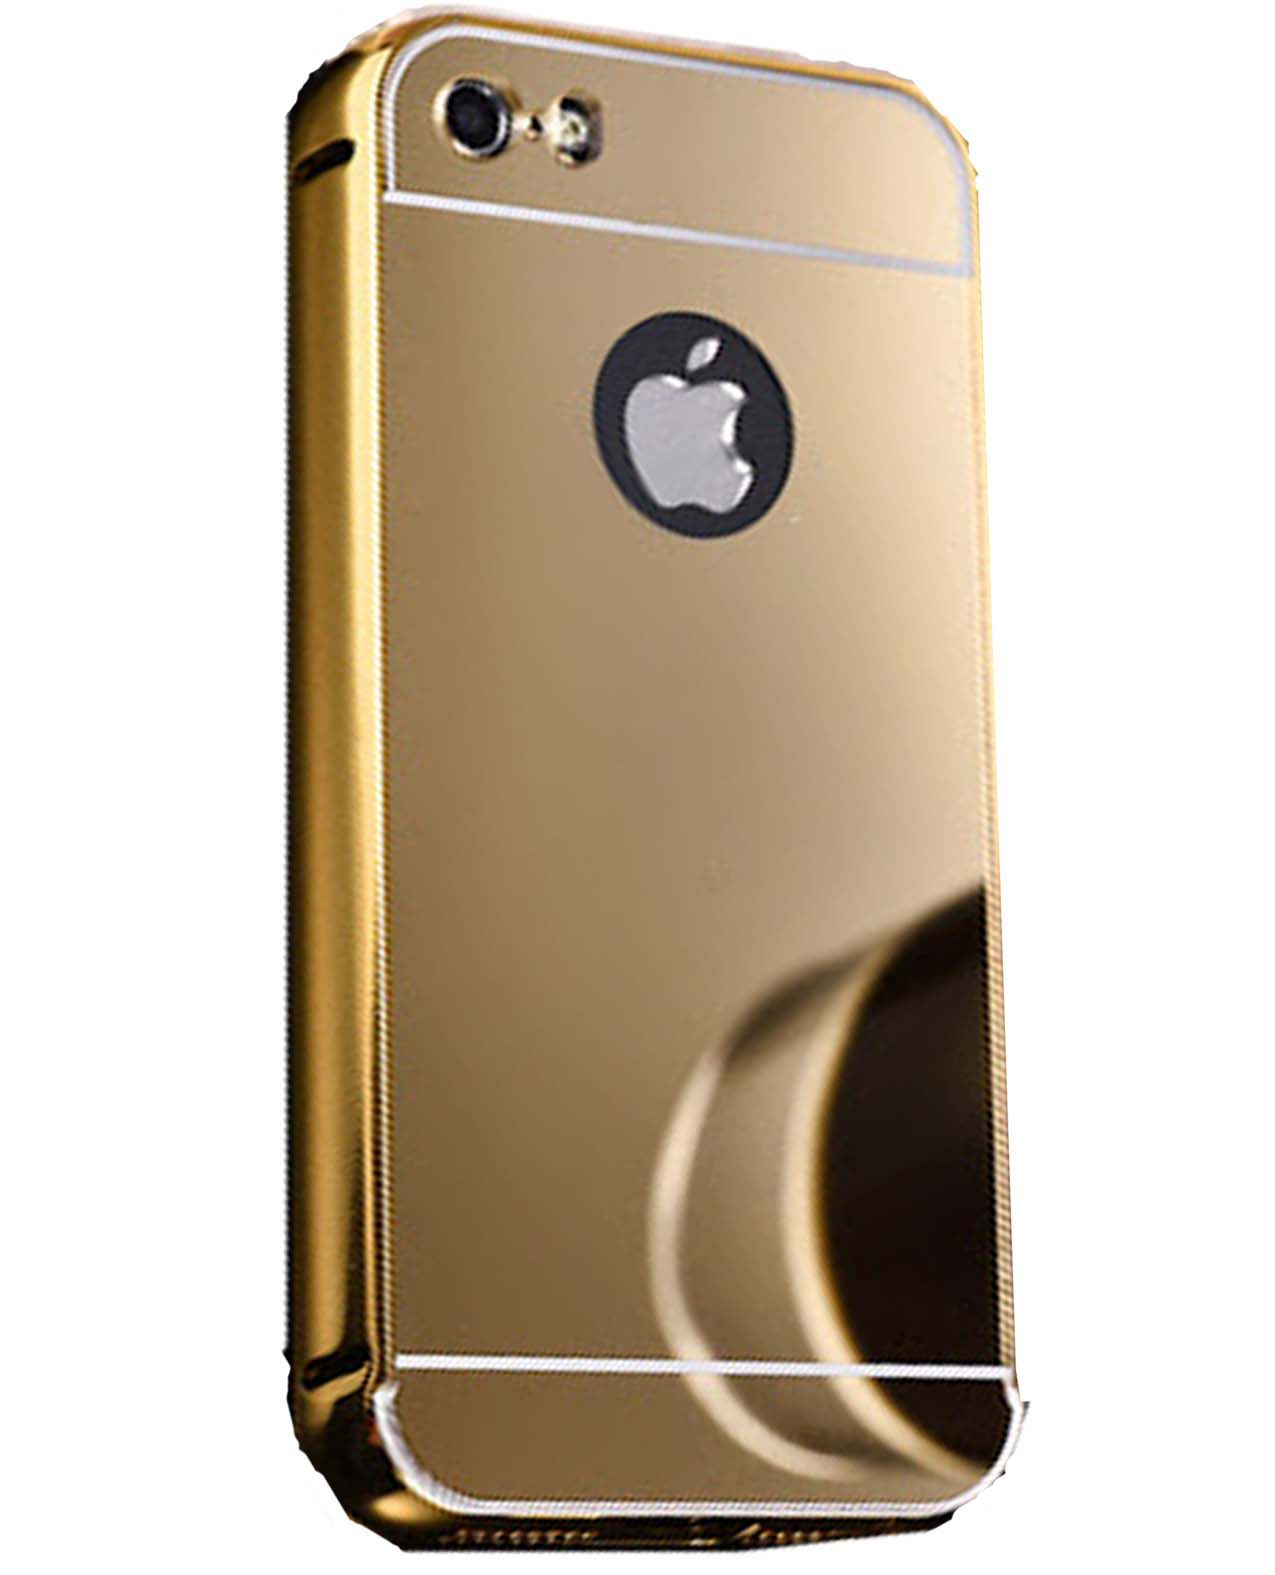 Apple 5S Cover by JKR - Golden - Plain Back Covers Online at Low | Snapdeal India